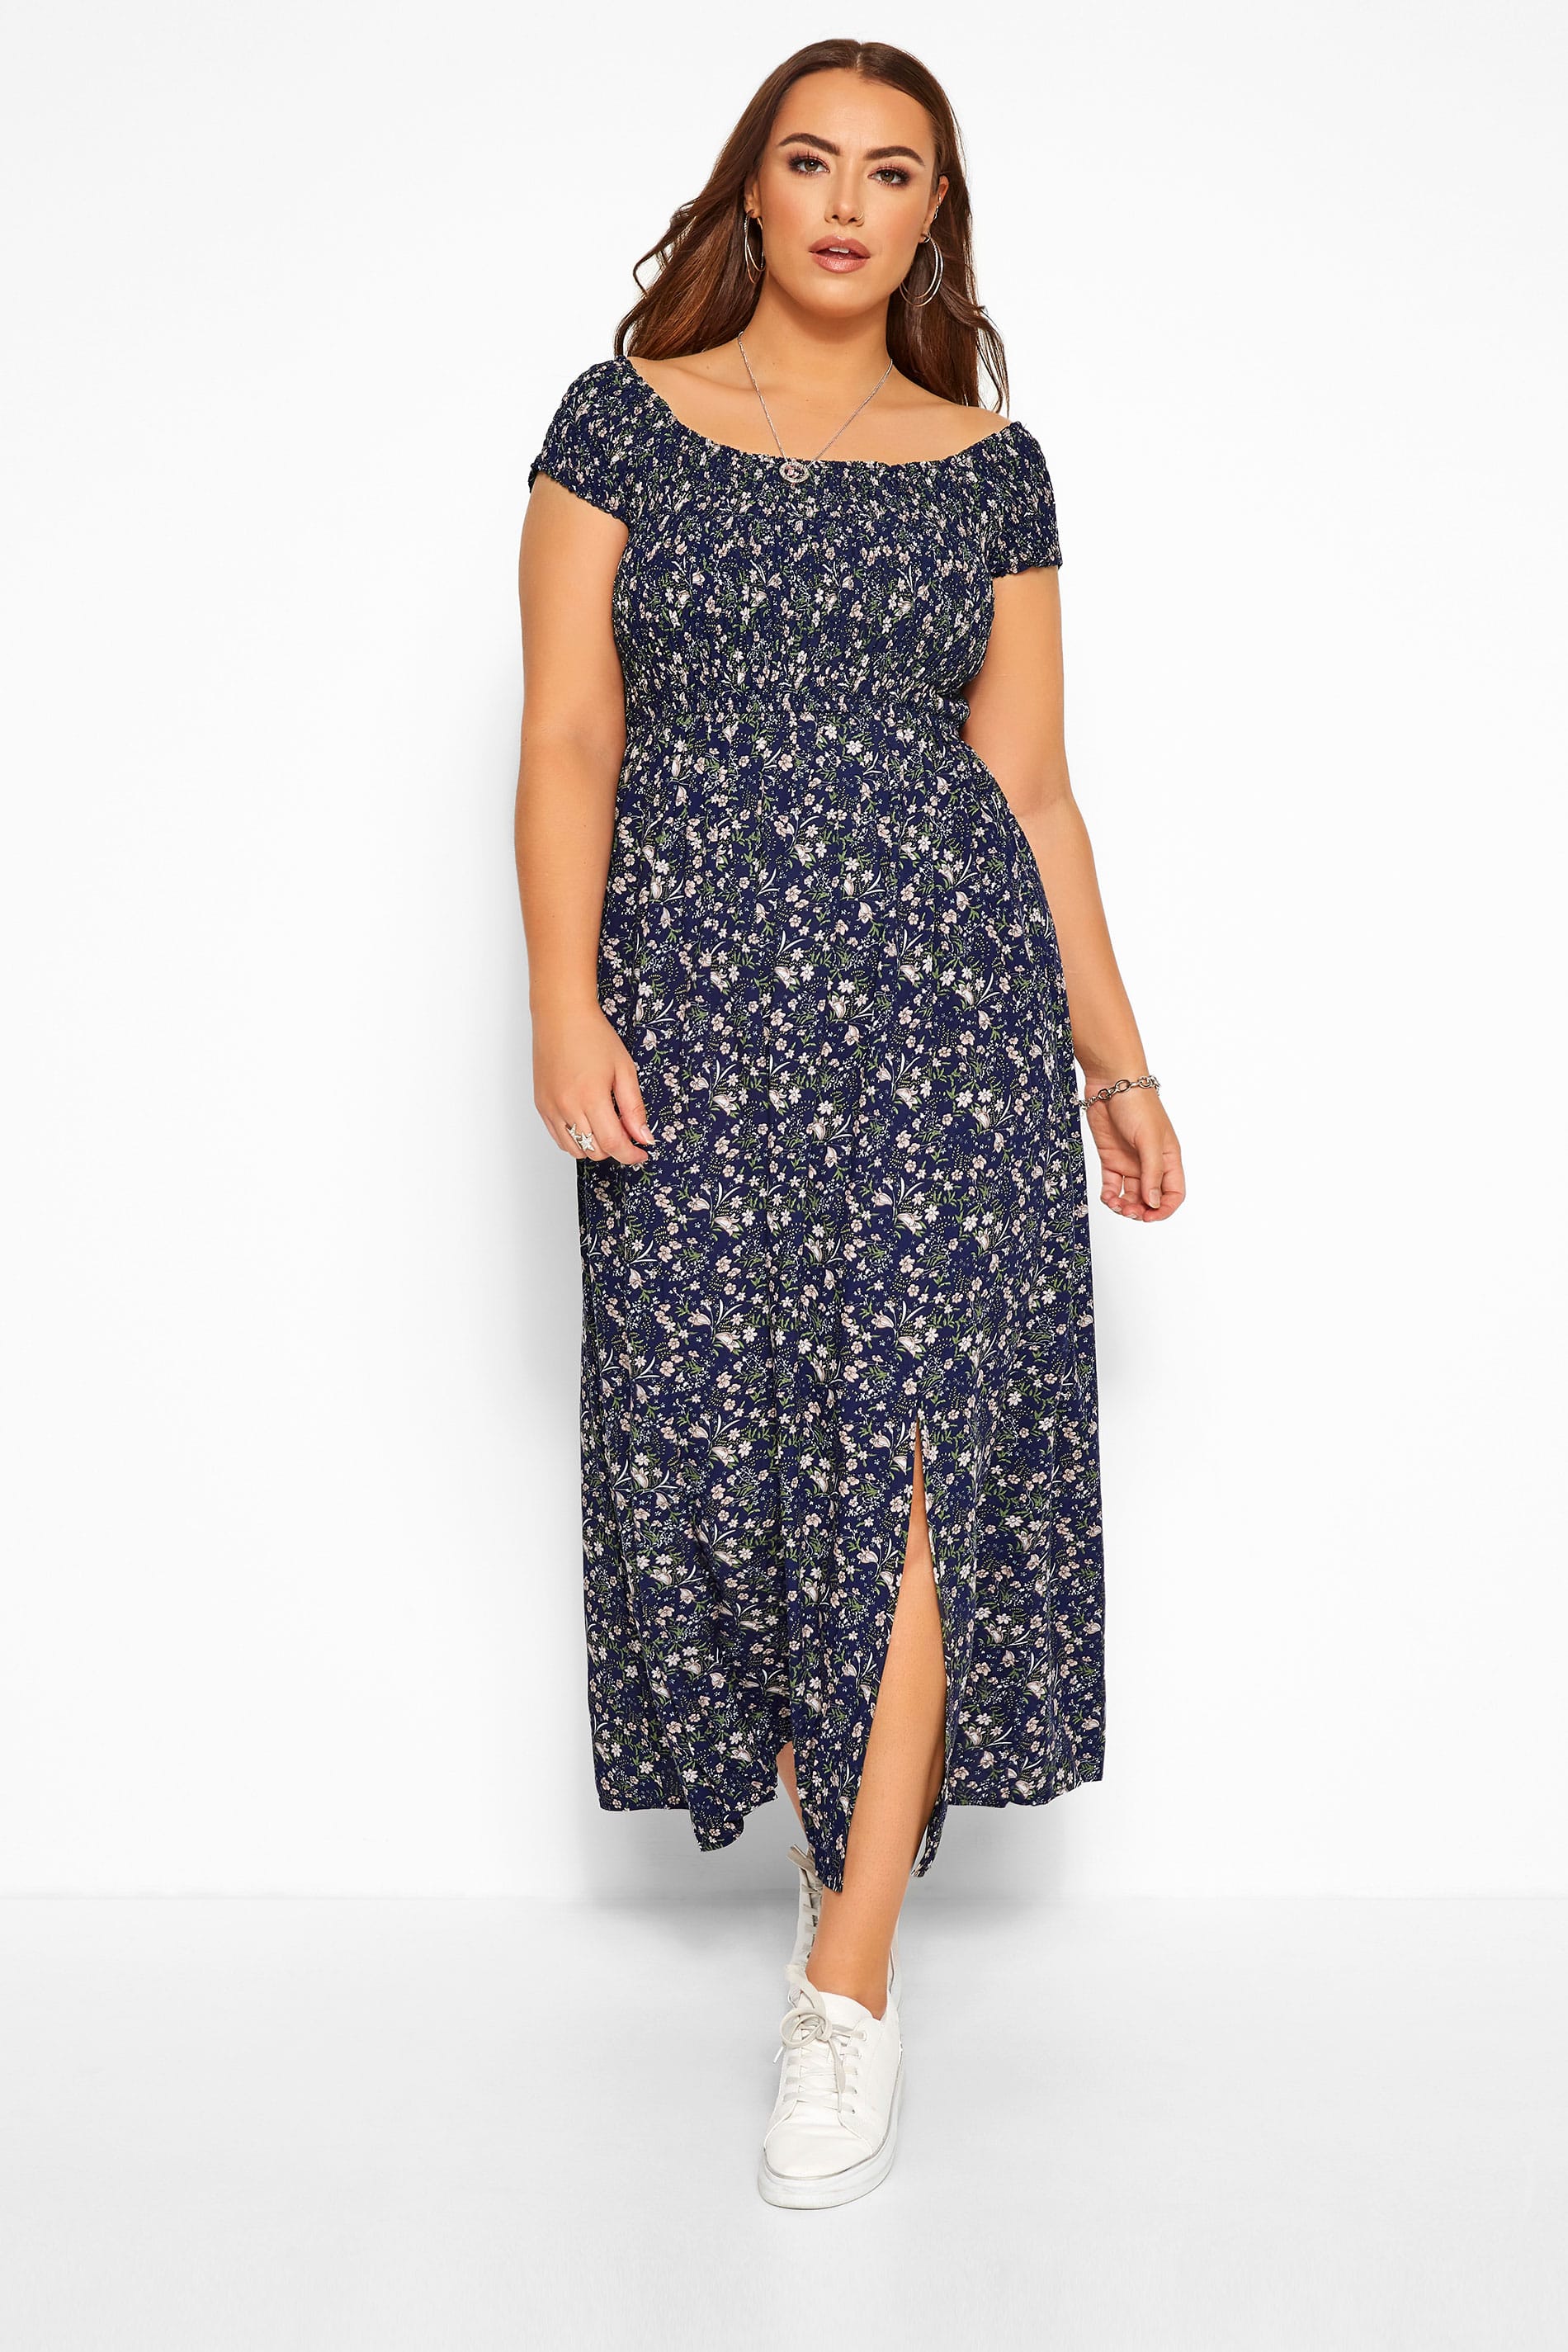 Navy & Pink Ditsy Floral Shirred Maxi Dress | Sizes 16-36 | Yours Clothing